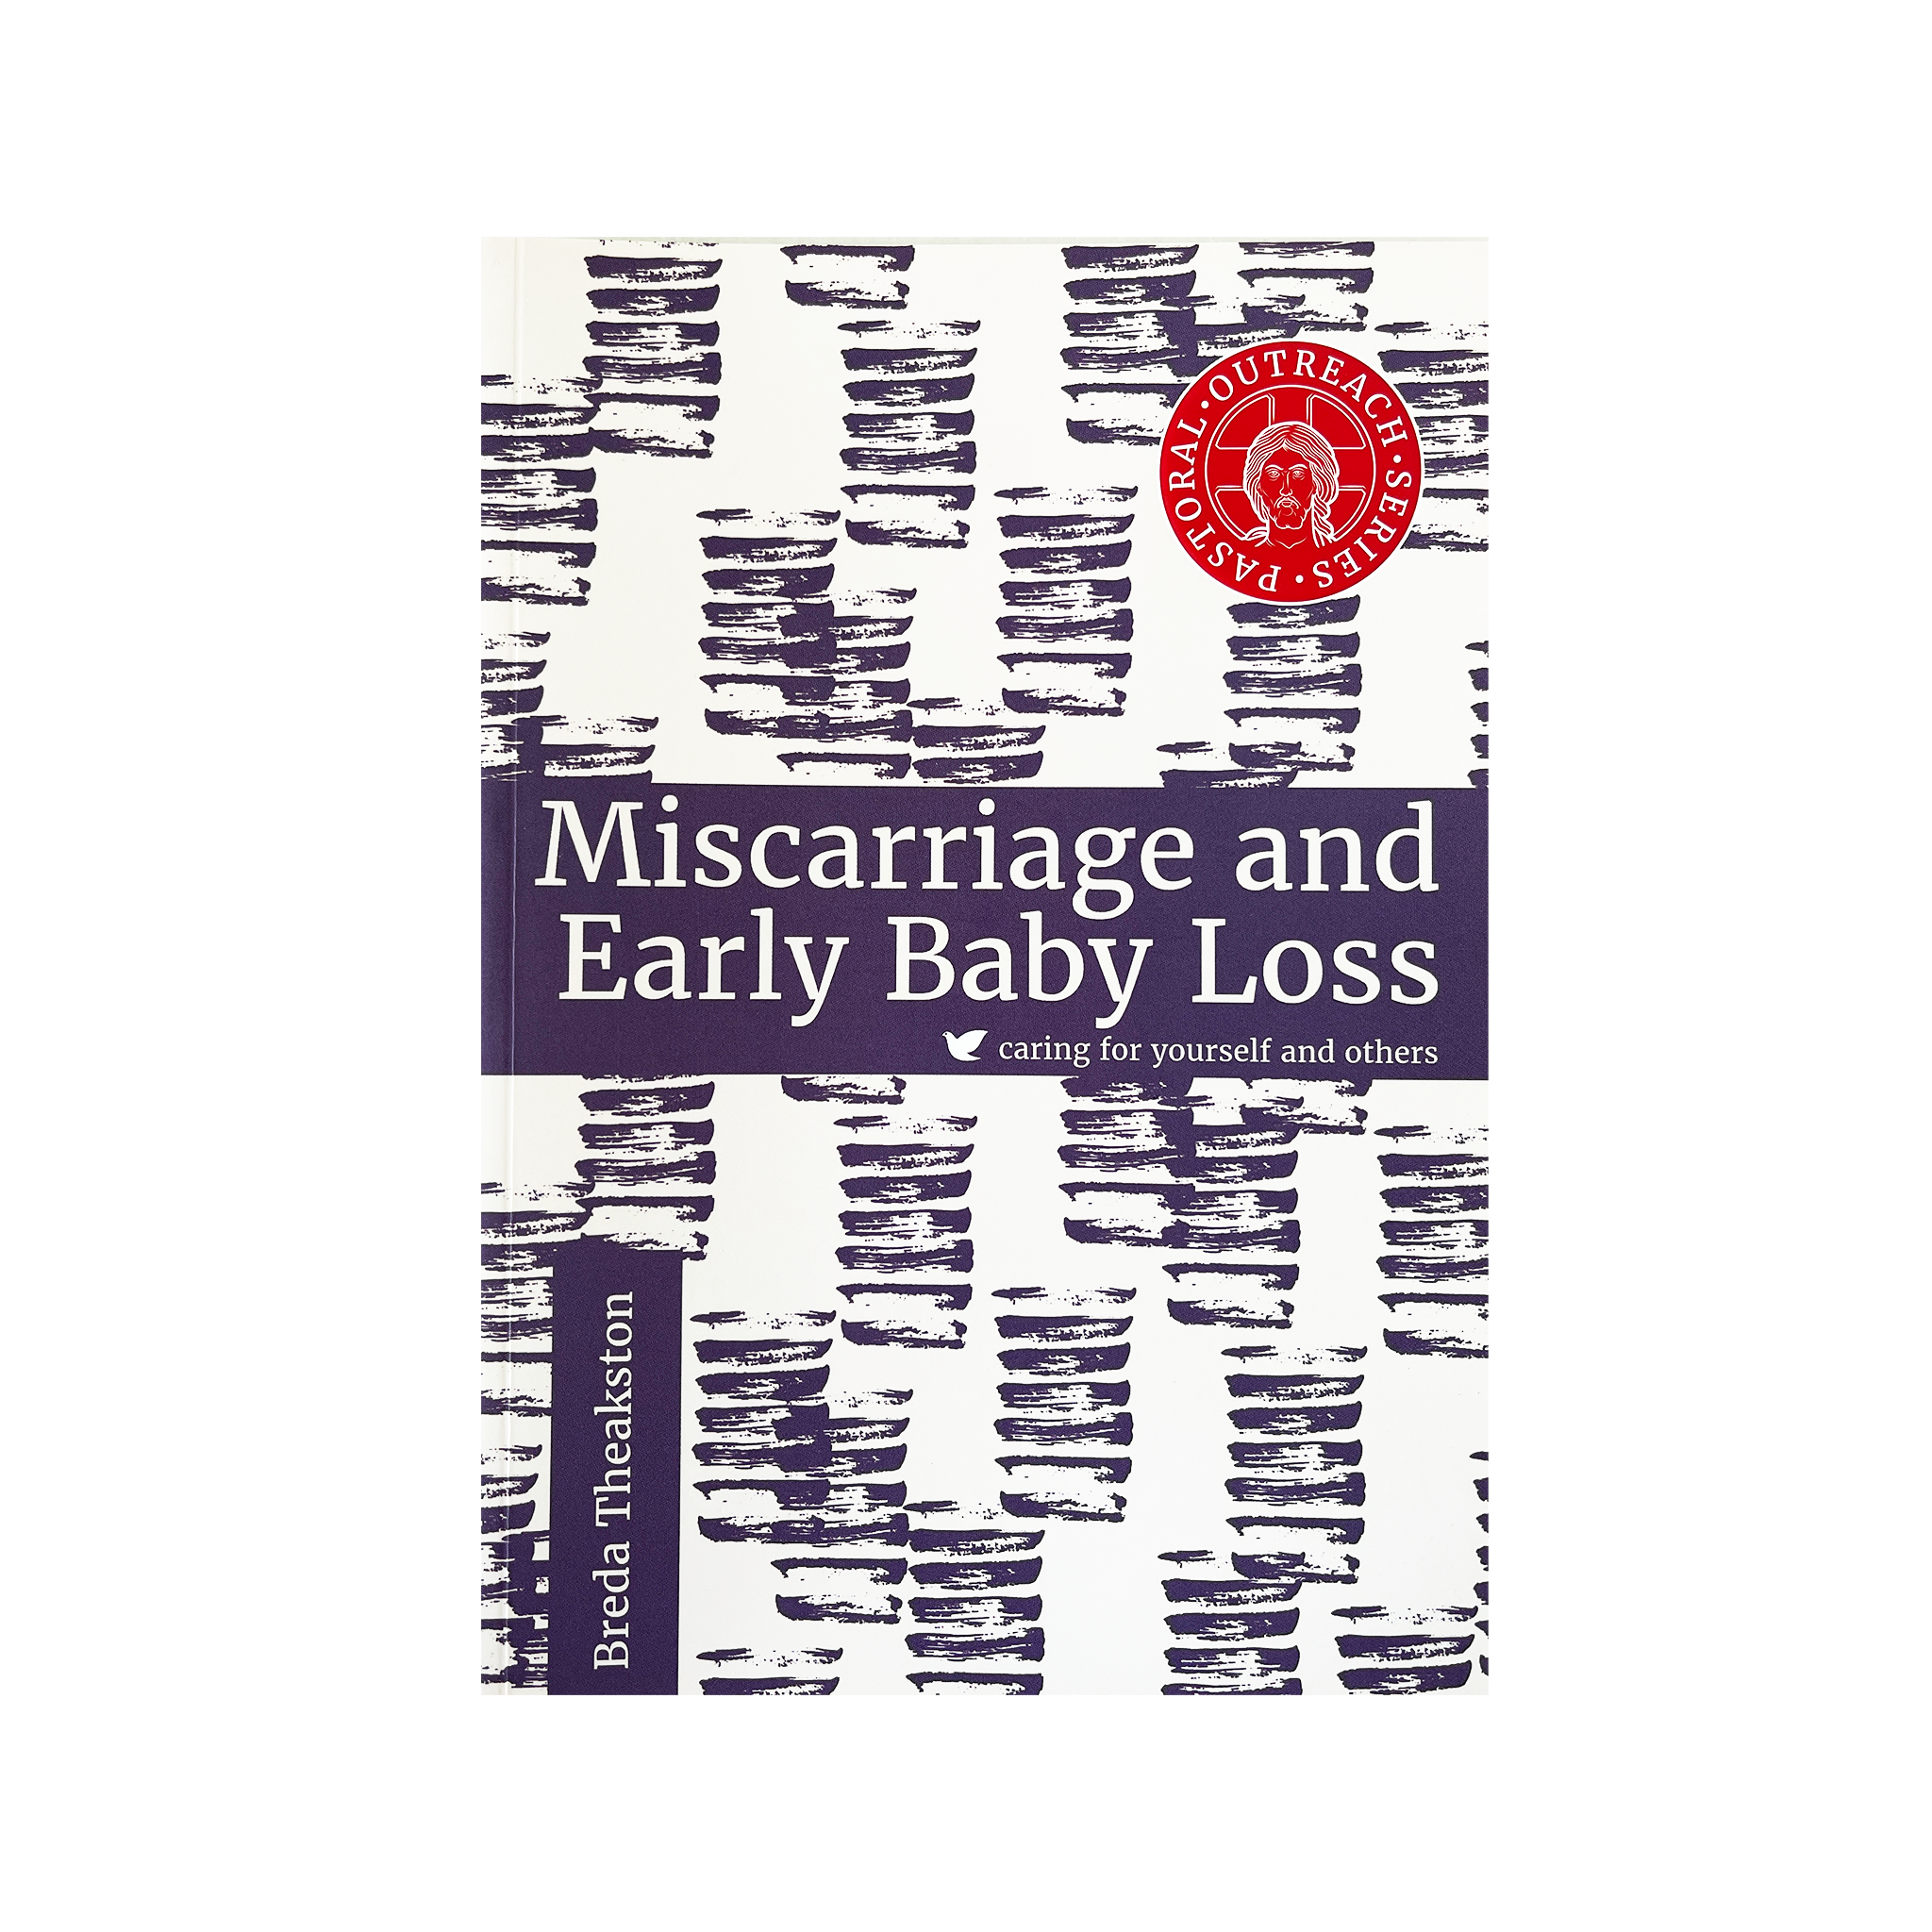 MISCARRIAGE & EARLY BABY LOSS